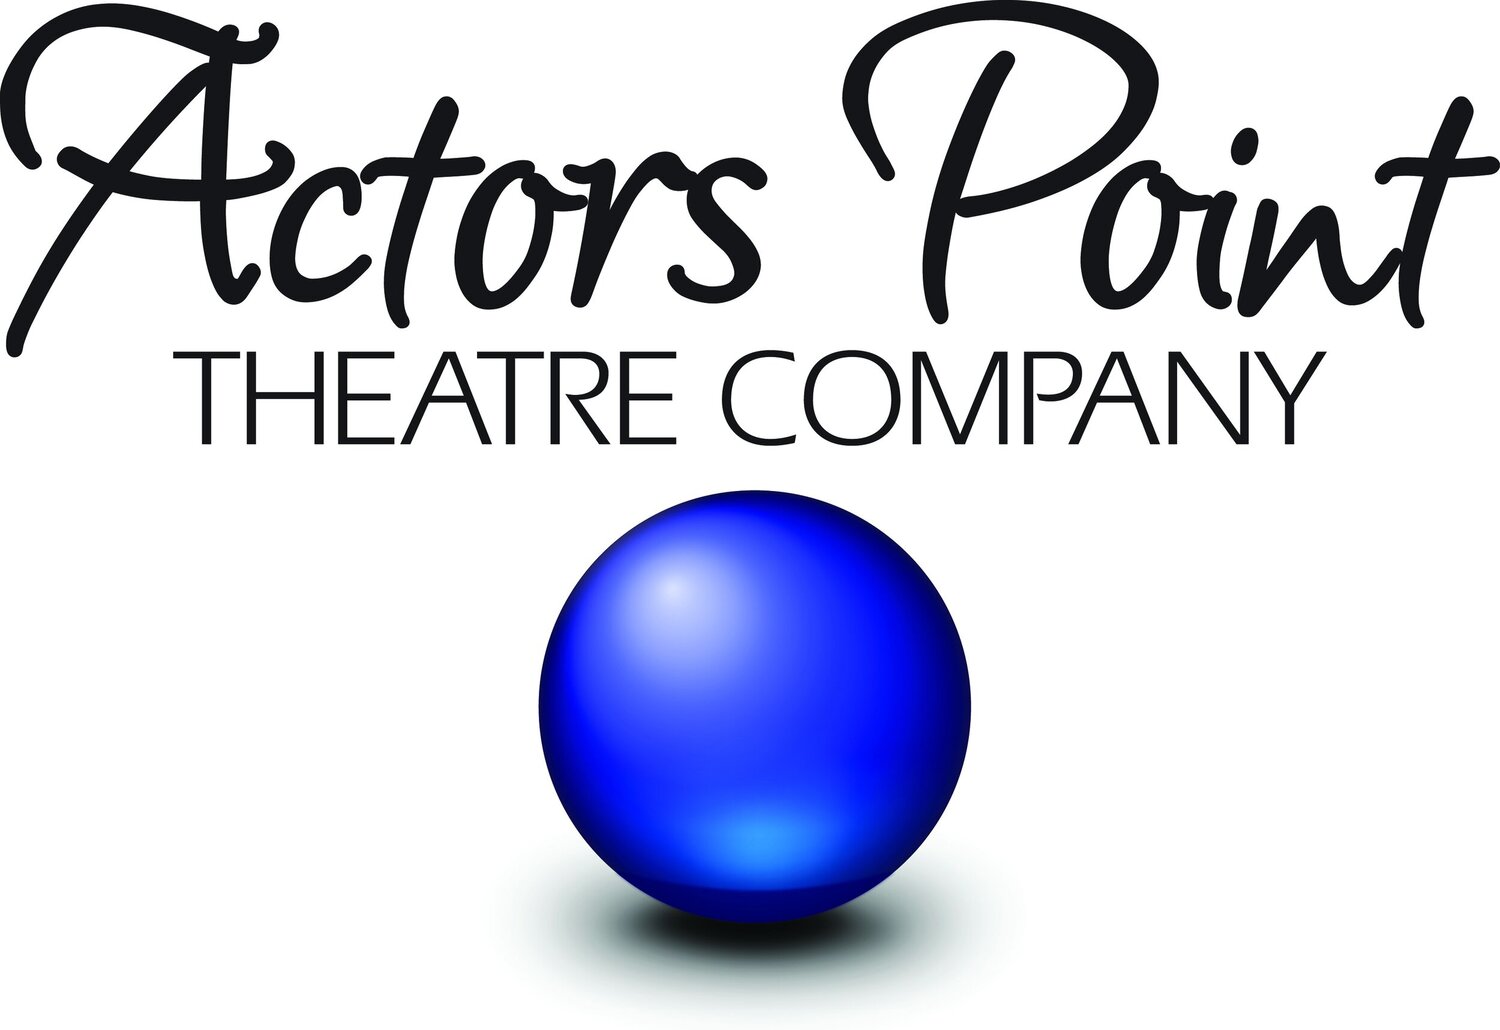 Point Theatre. Acting company